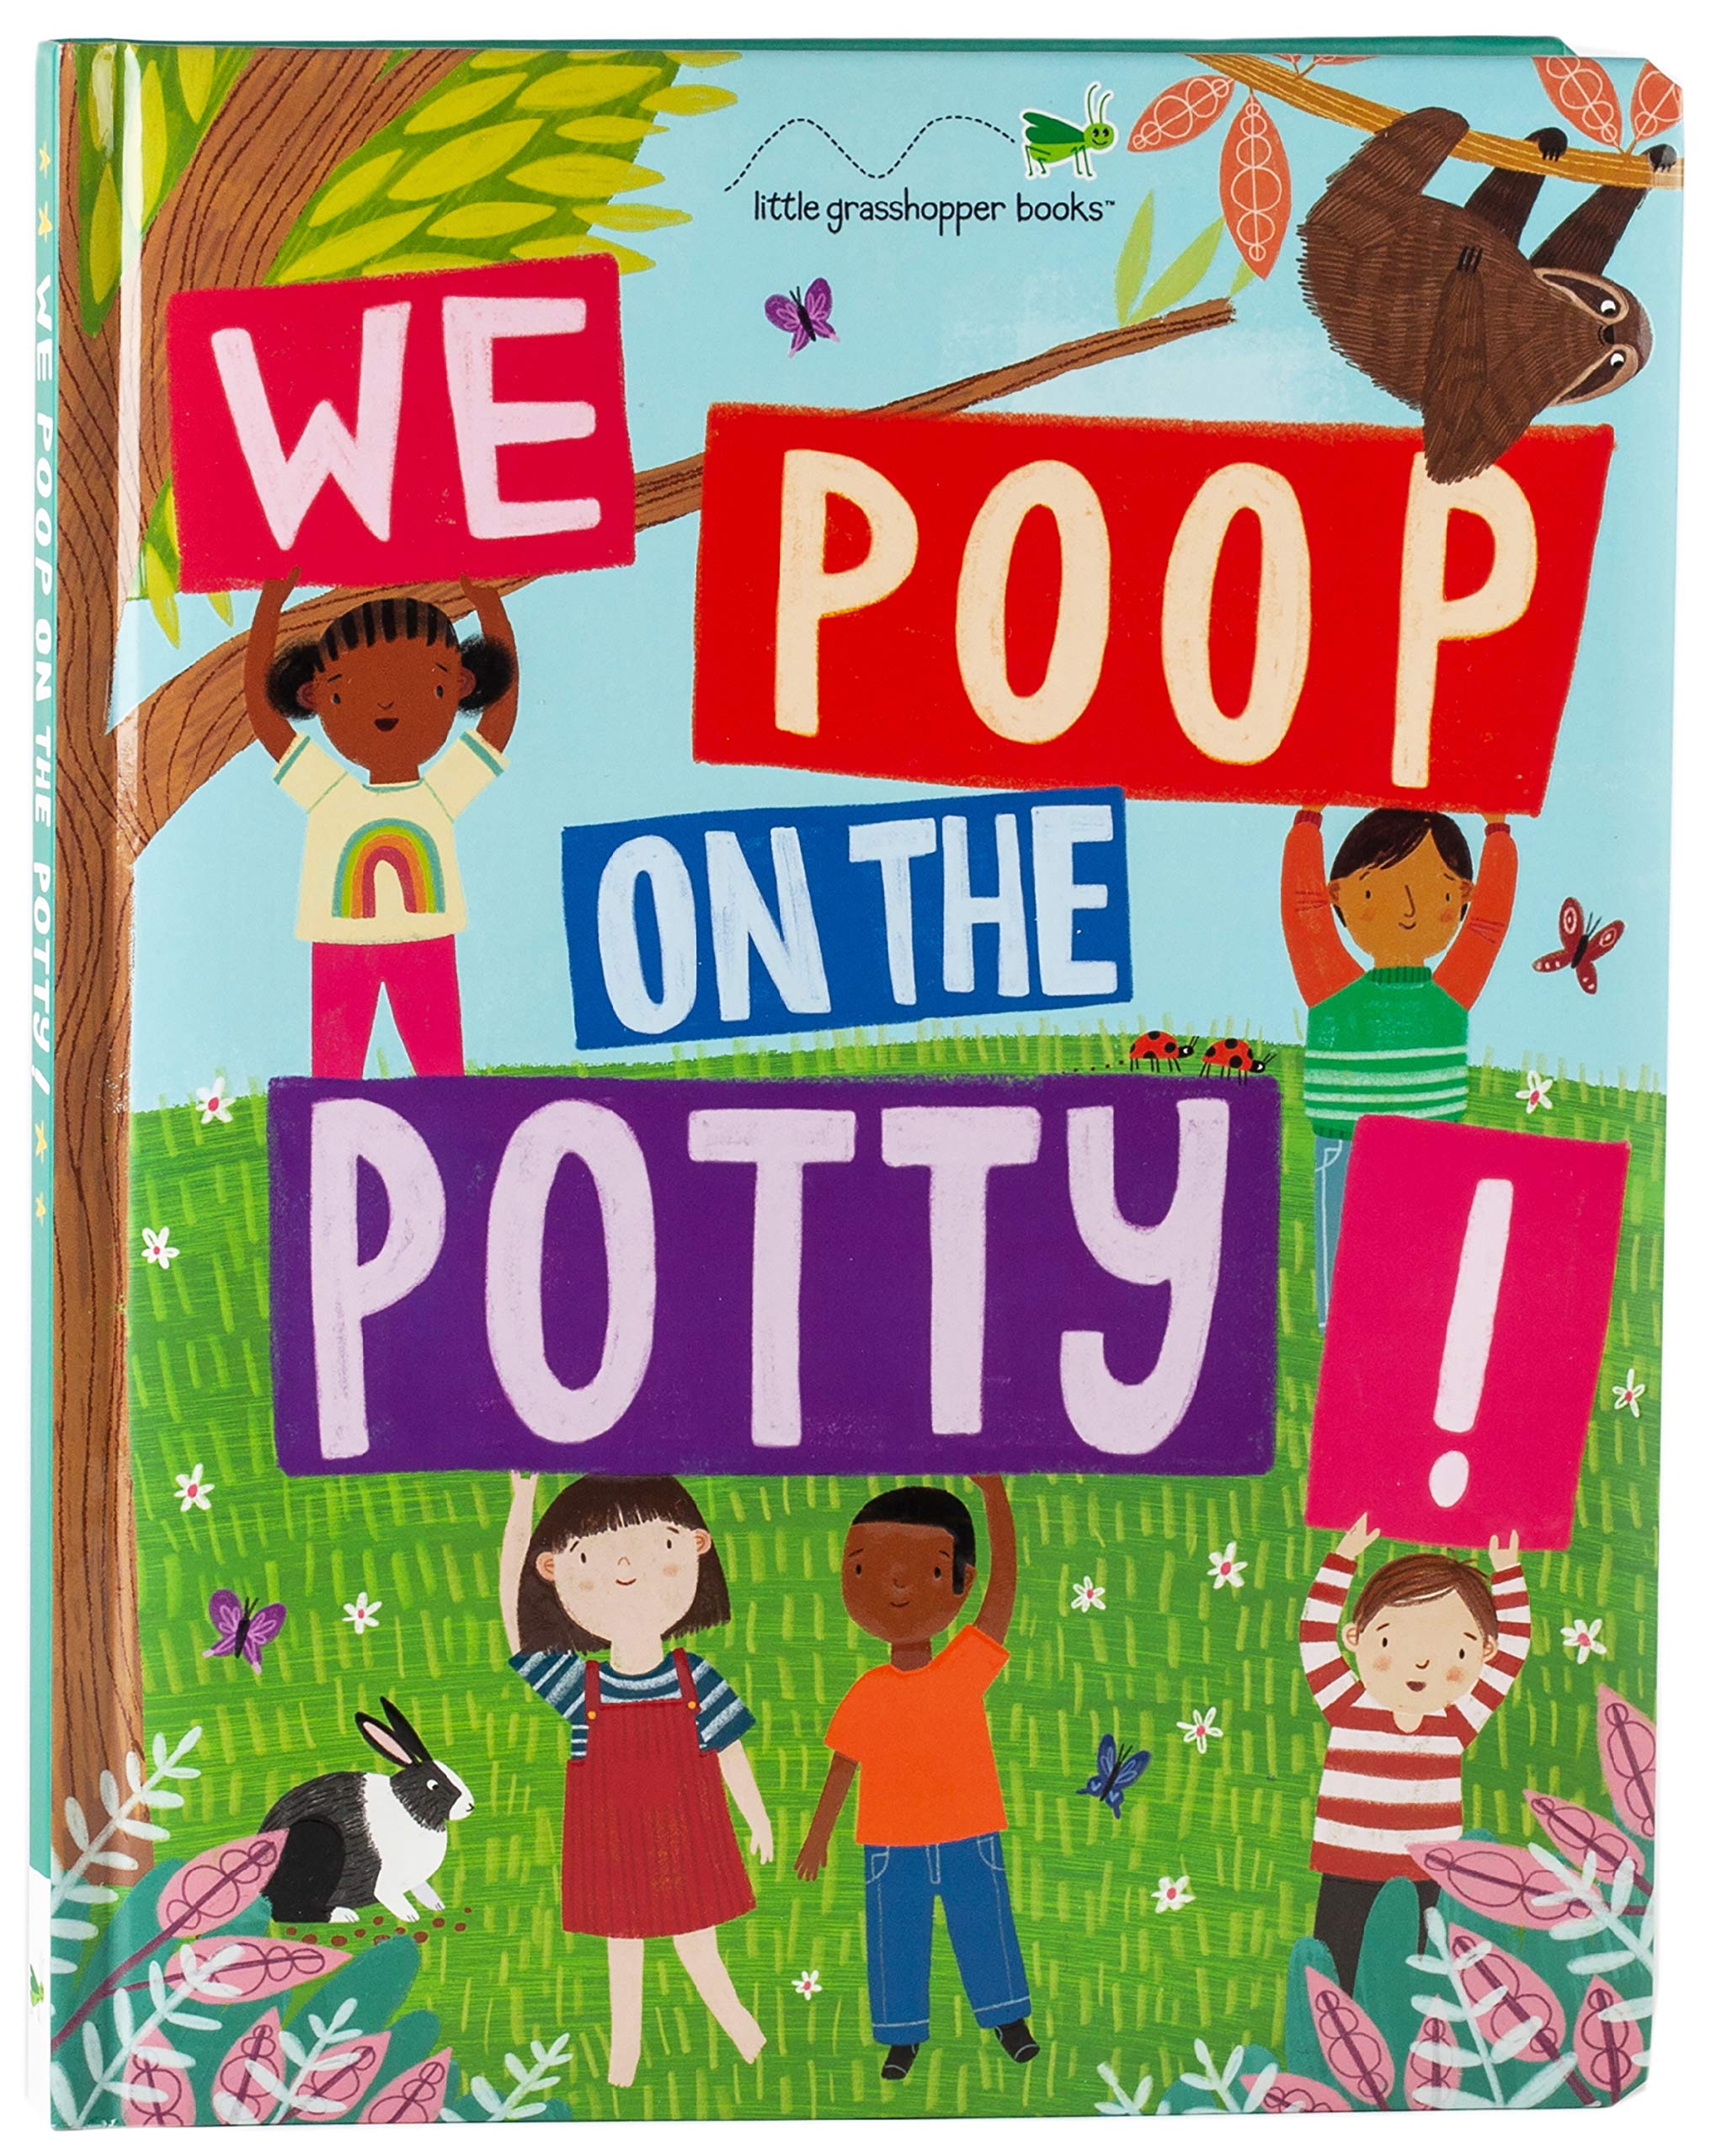 We Poop on the Potty! (Mom's Choice Awards Gold Award Recipient) by Little Grasshopper Books